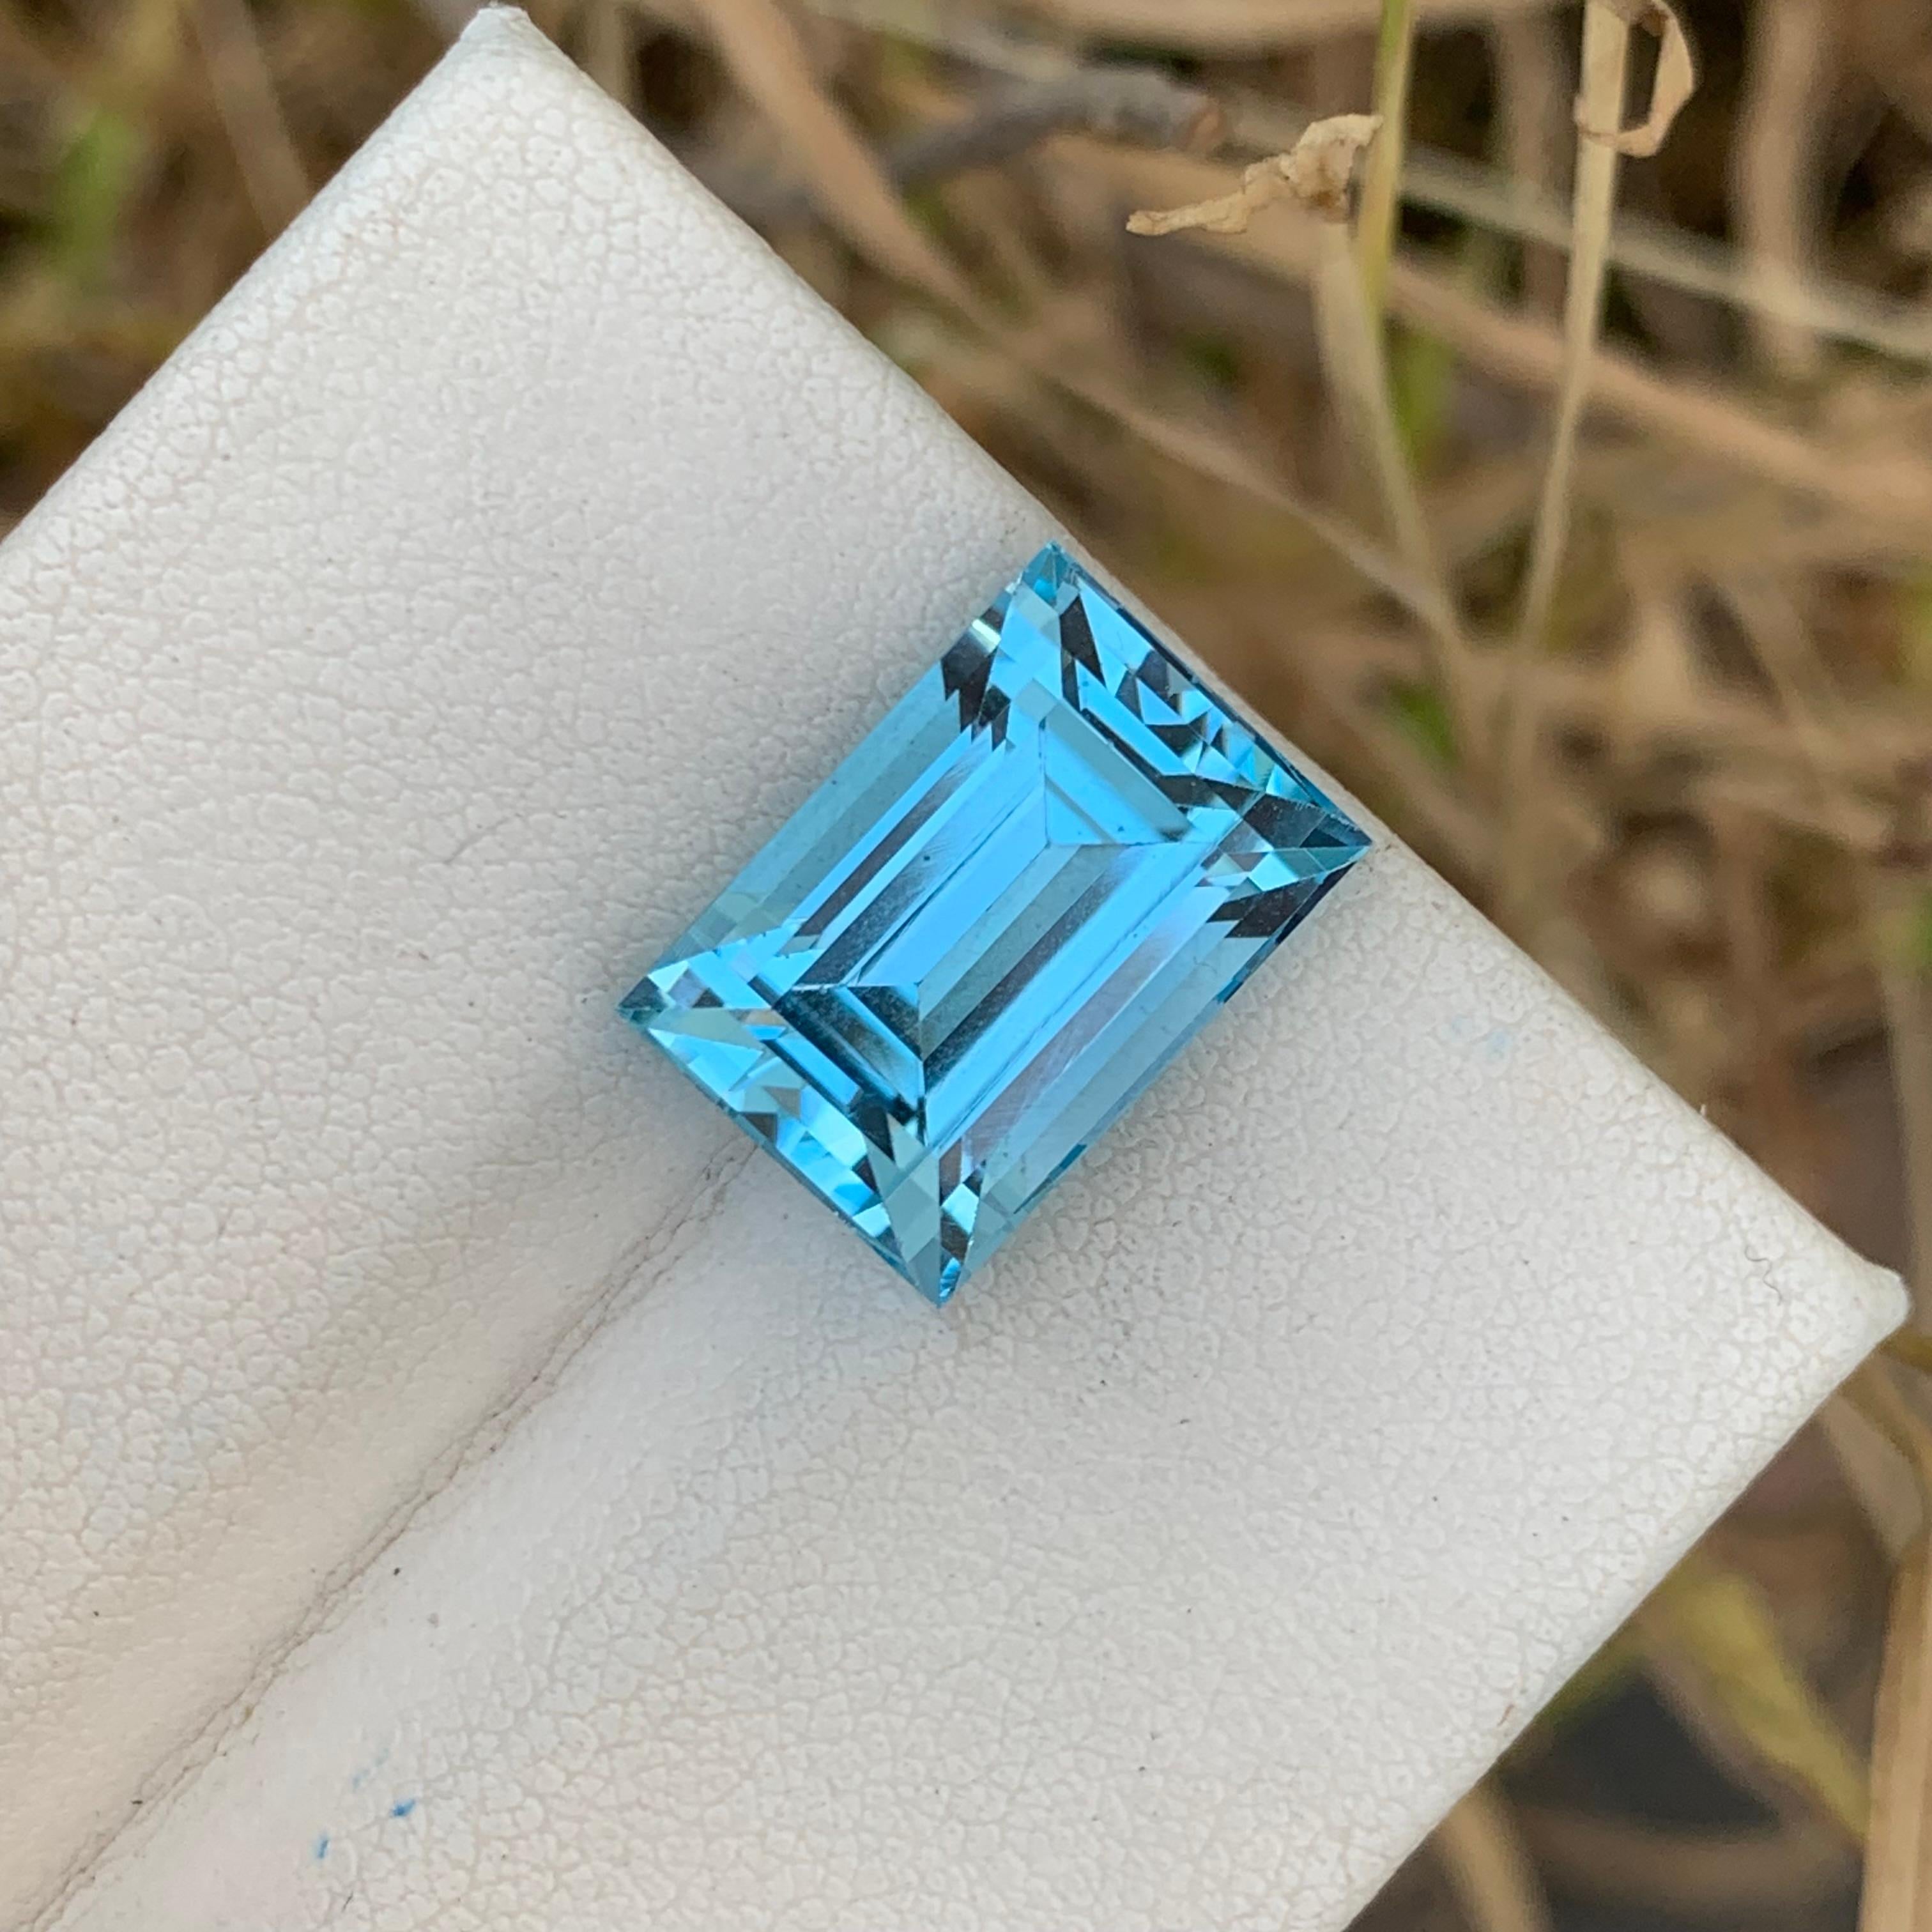 Loose Swiss Blue Topaz
Weight: 10.05 Carats 
Dimension: 13.5 x 9.4 x 8 Mm
Colour : Blue 
Shape: Baguette 
Certificate: On Demand 
Origin: Brazil 

Swiss blue topaz is a stunning gemstone known for its captivating hue and versatility in jewelry